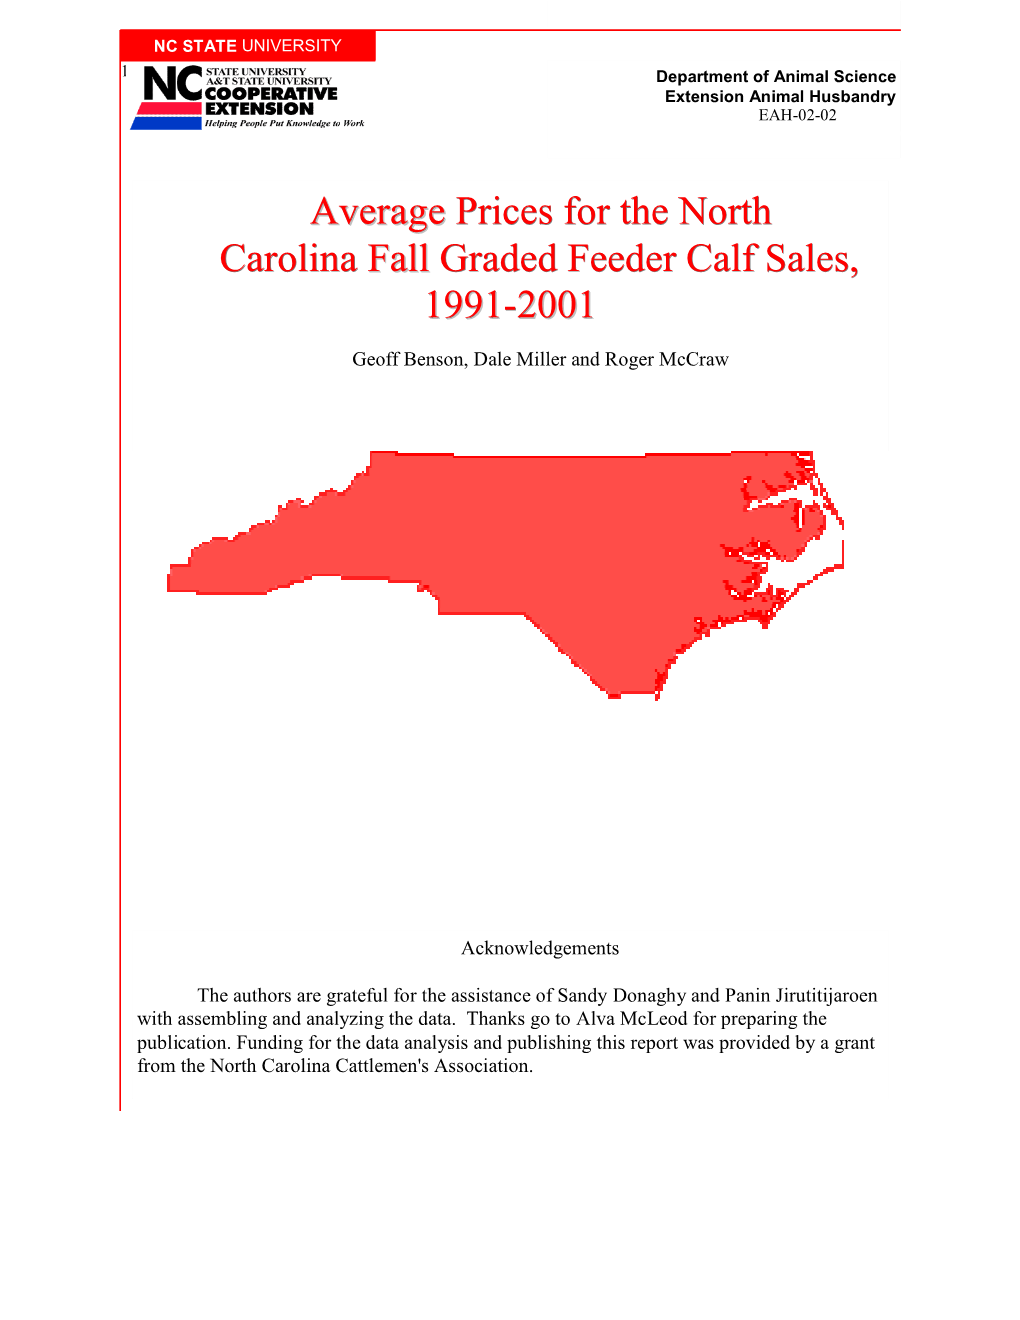 Feeder Cattle Production Is an Important Beef Enterprise in North Carolina